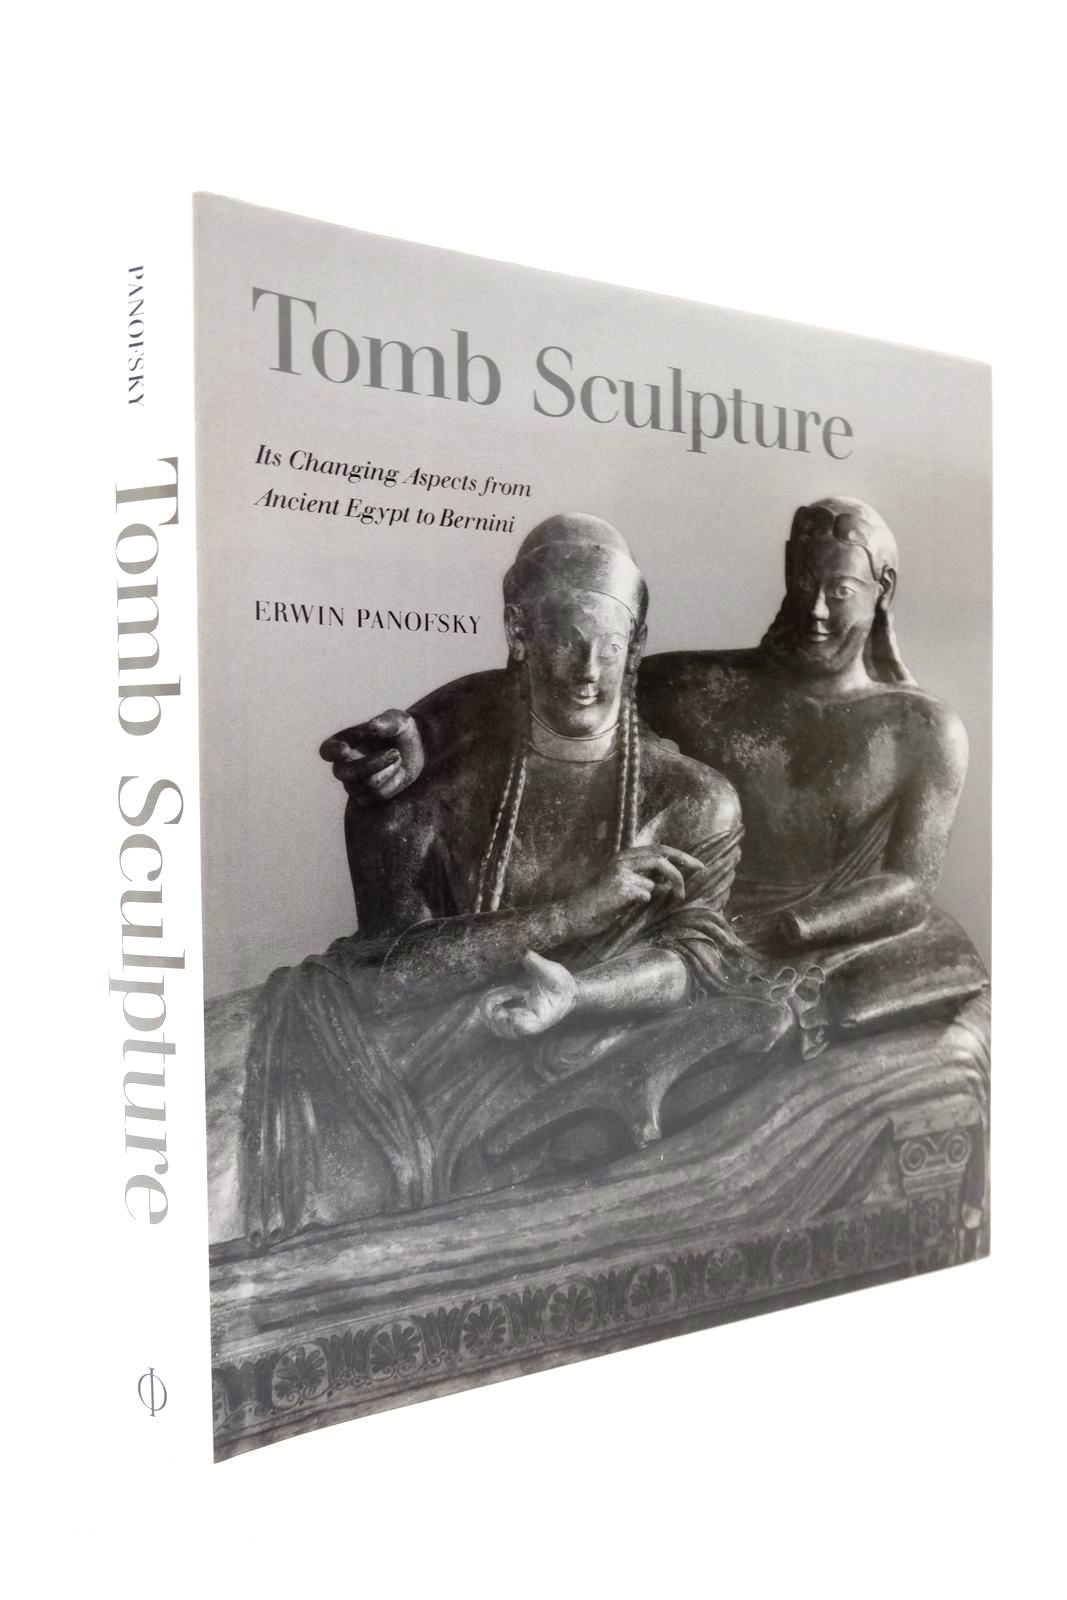 Photo of TOMB SCULPTURE: FOUR LECTURES ON ITS CHANGING ASPECTS FROM ANCIENT EGYPT TO BERNINI- Stock Number: 2138948